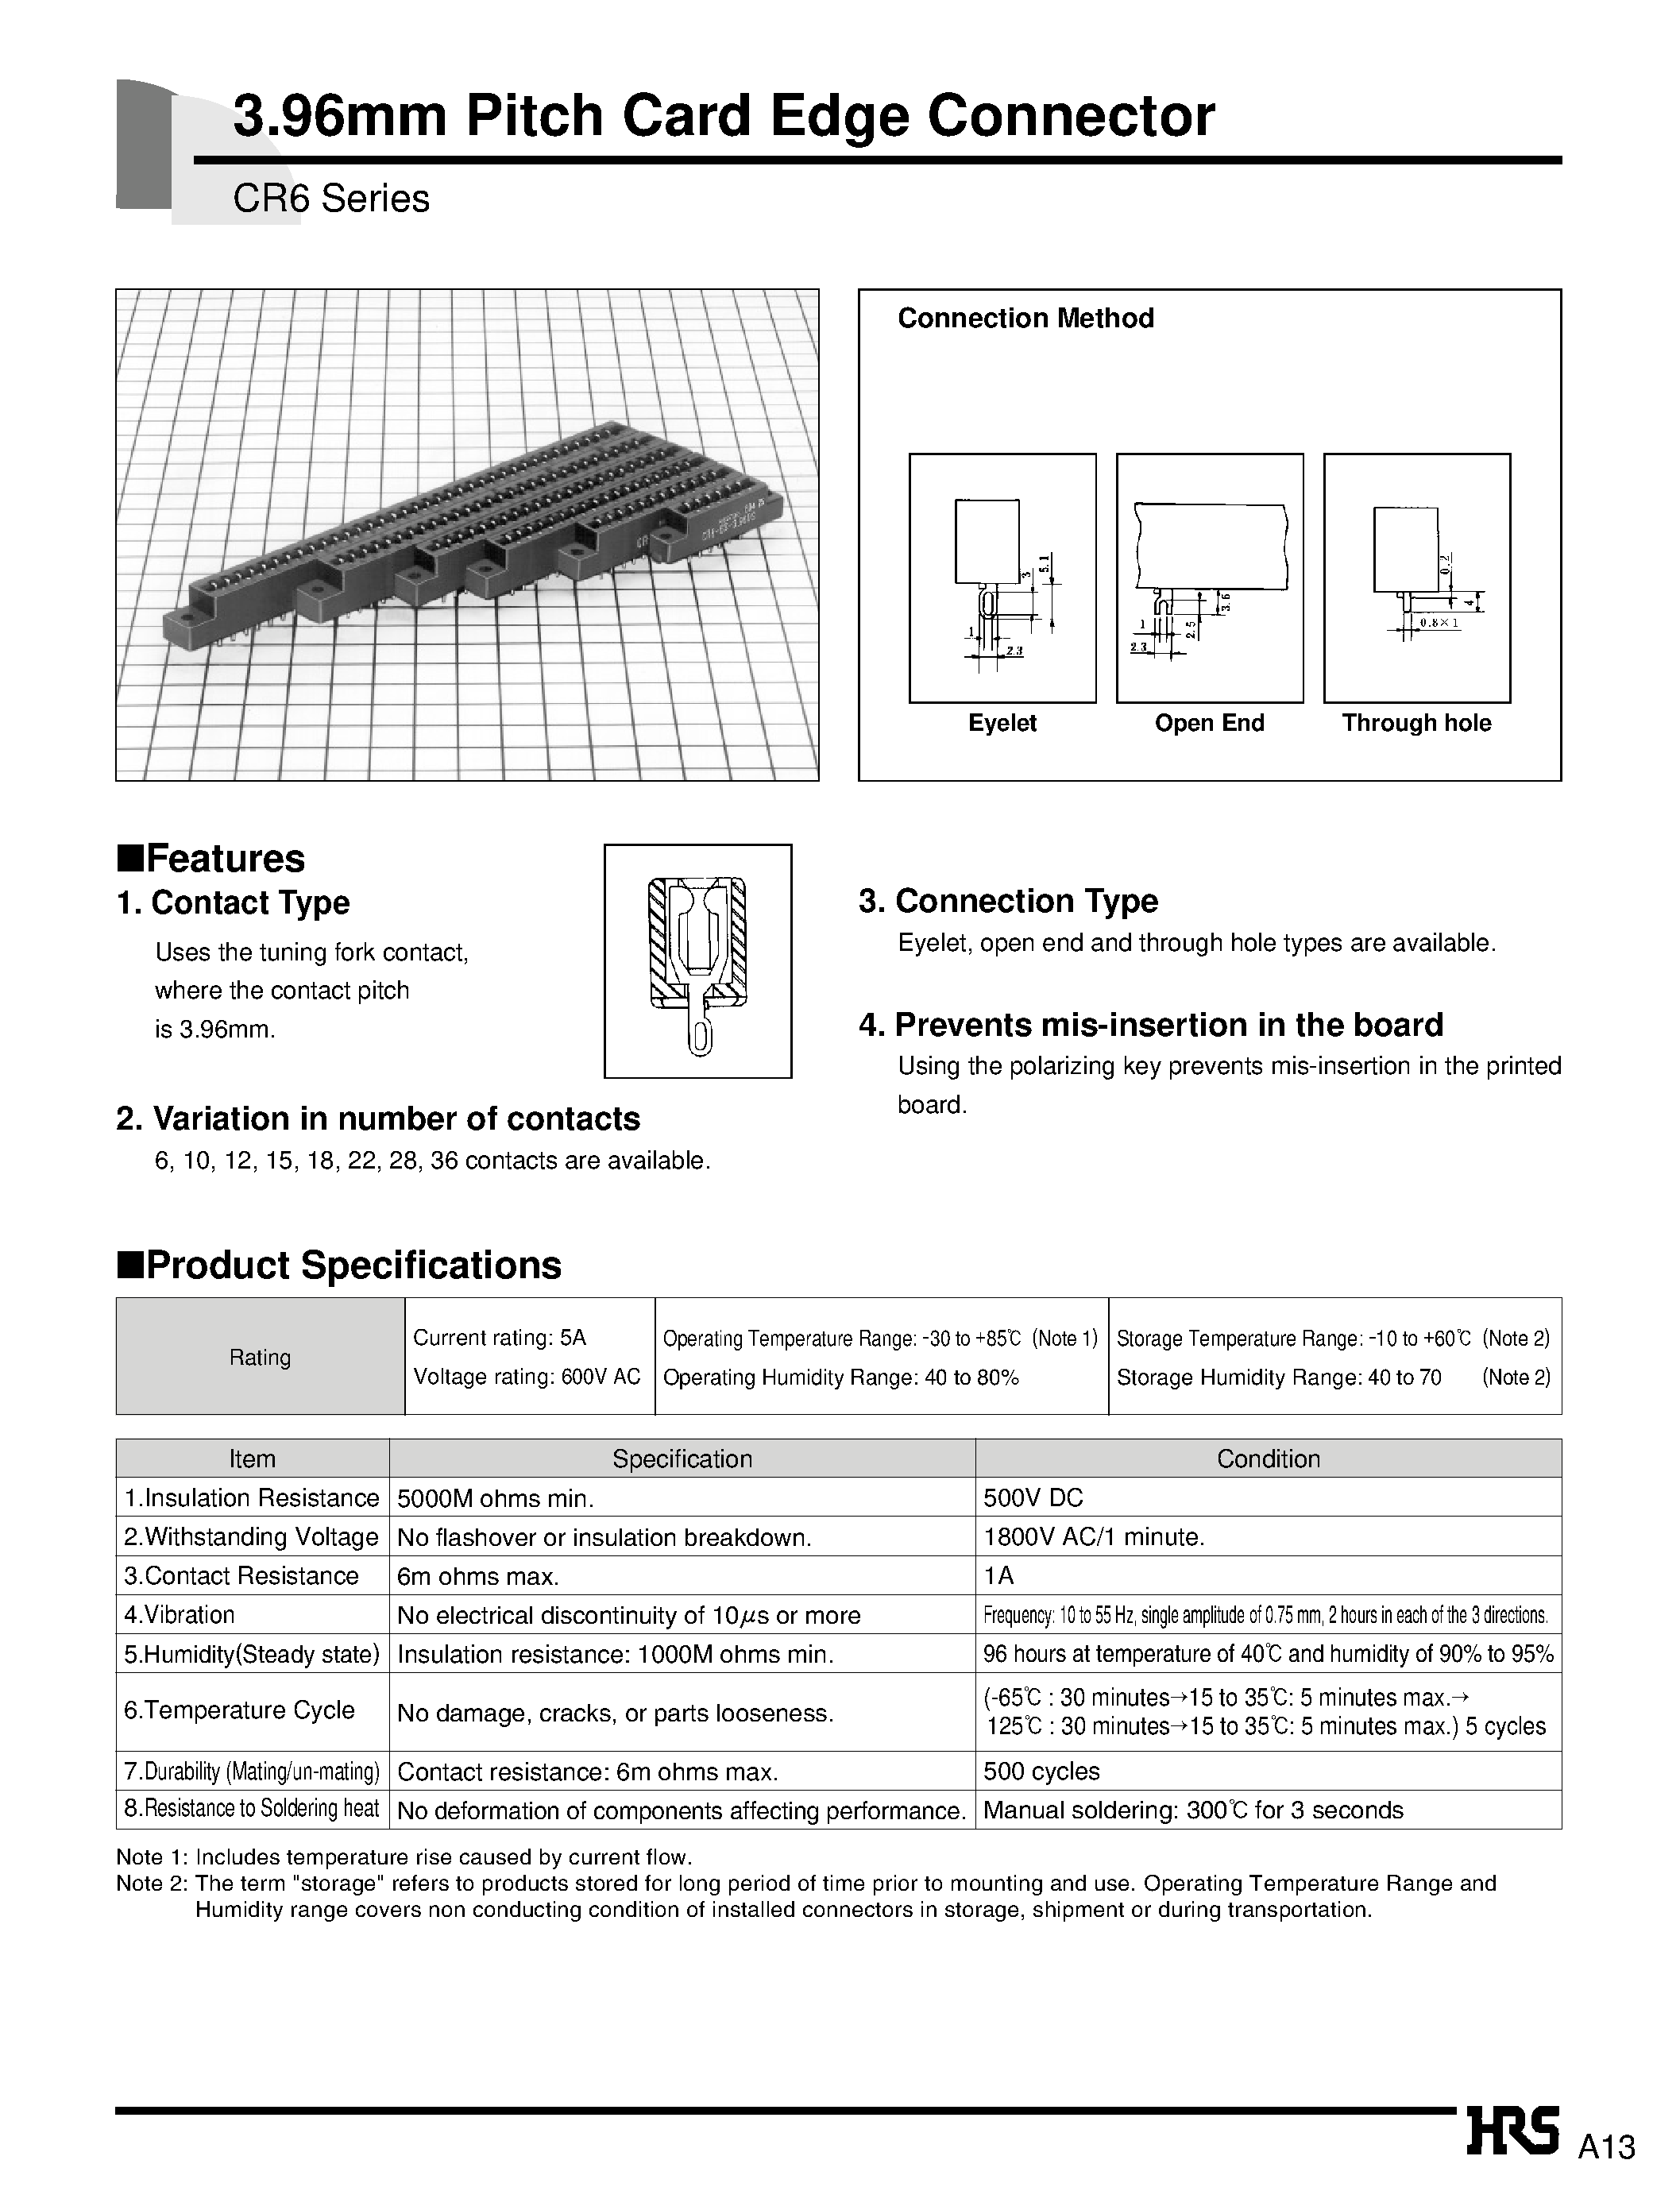 Datasheet CR6-18S-3.96DS - 3.96mm Pitch Card Edge Connector page 1